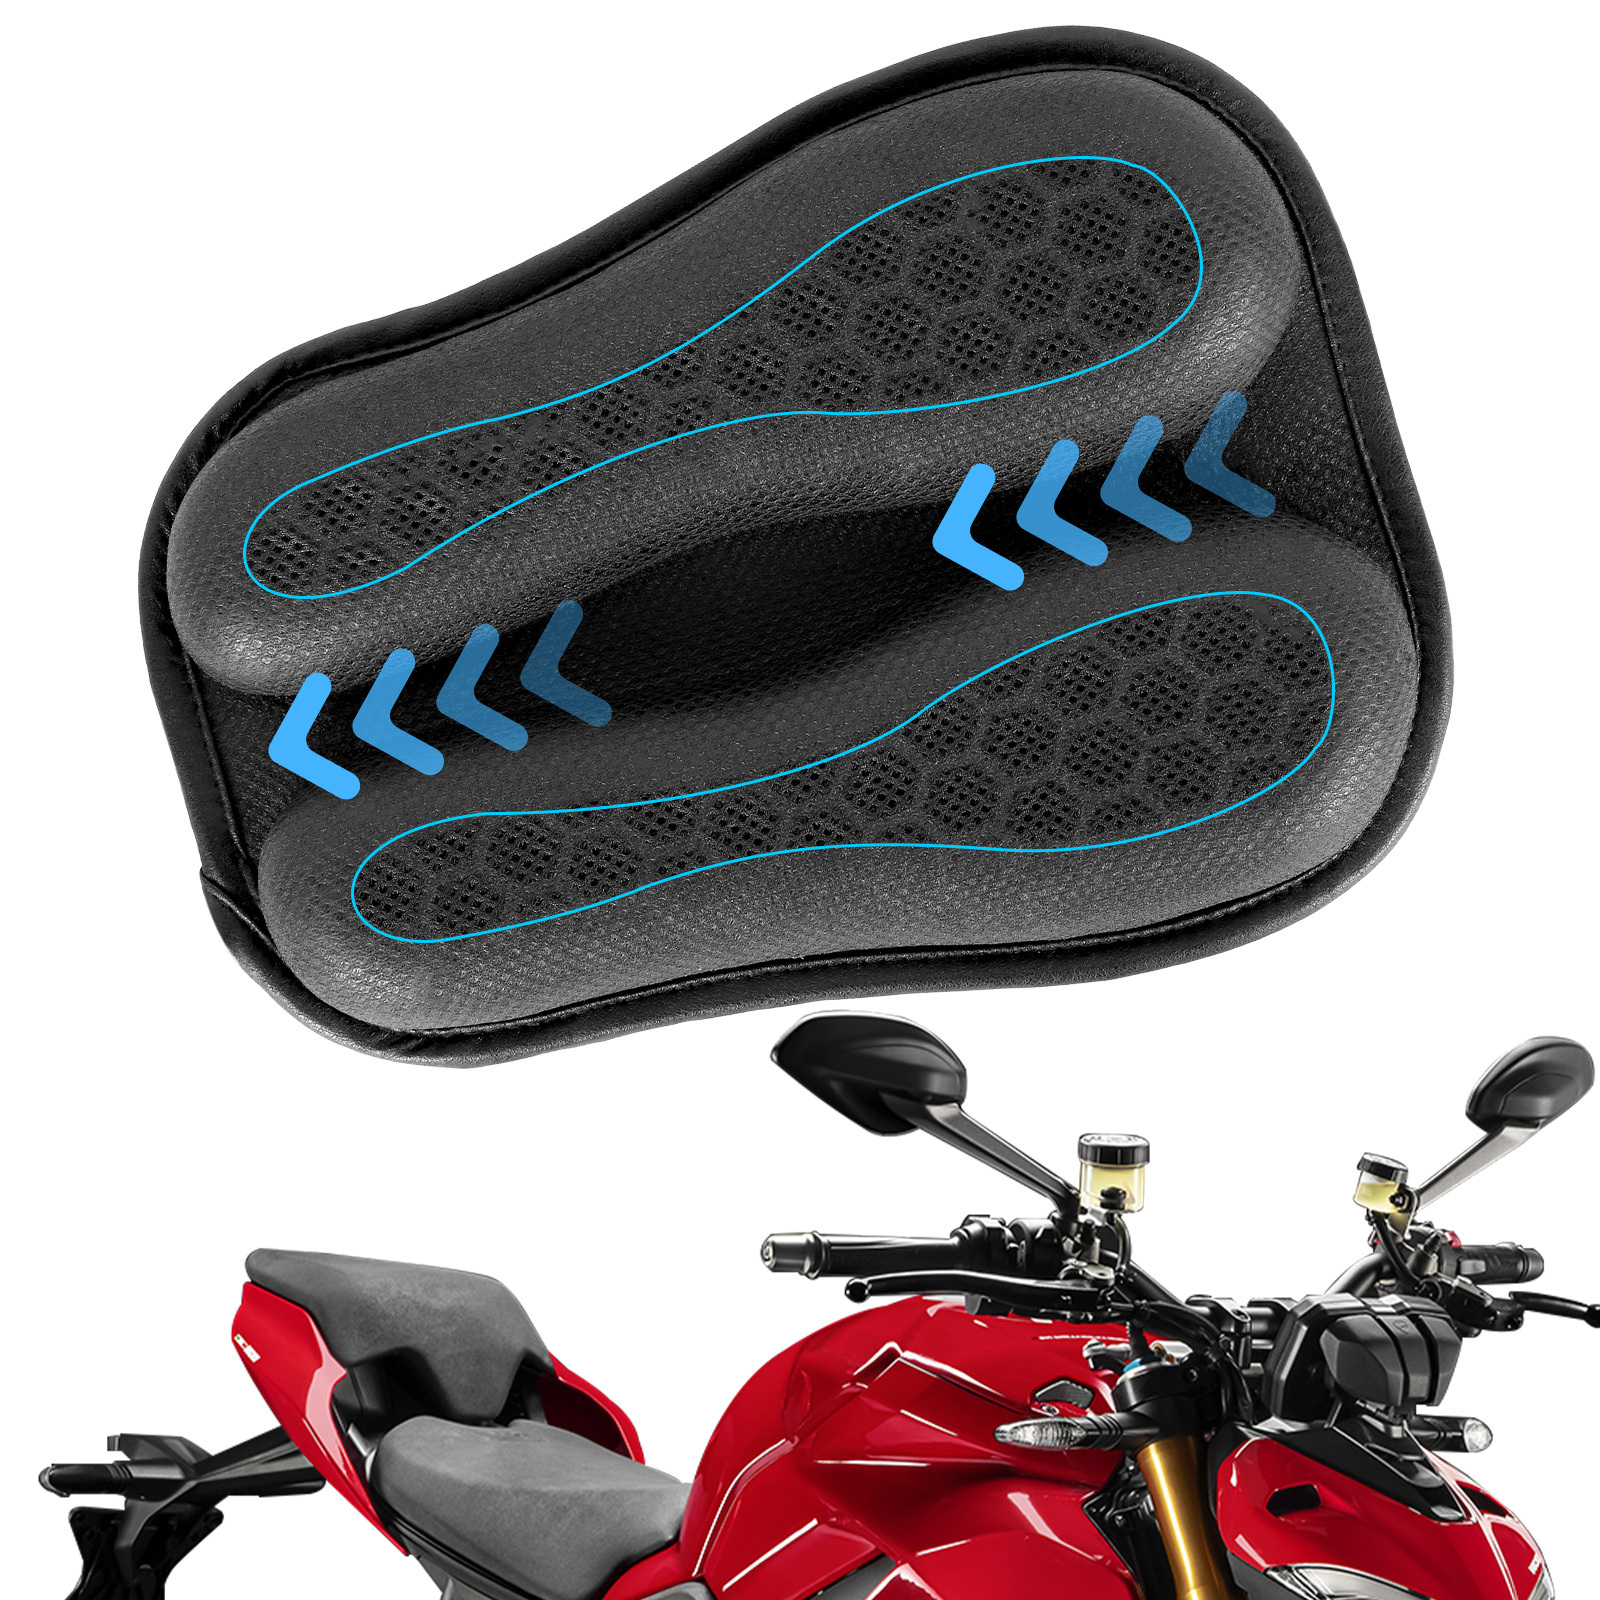 Motorcycle Gel Seat Cushion Comfort Shock Pad Cover Breathable Pressure  Relief